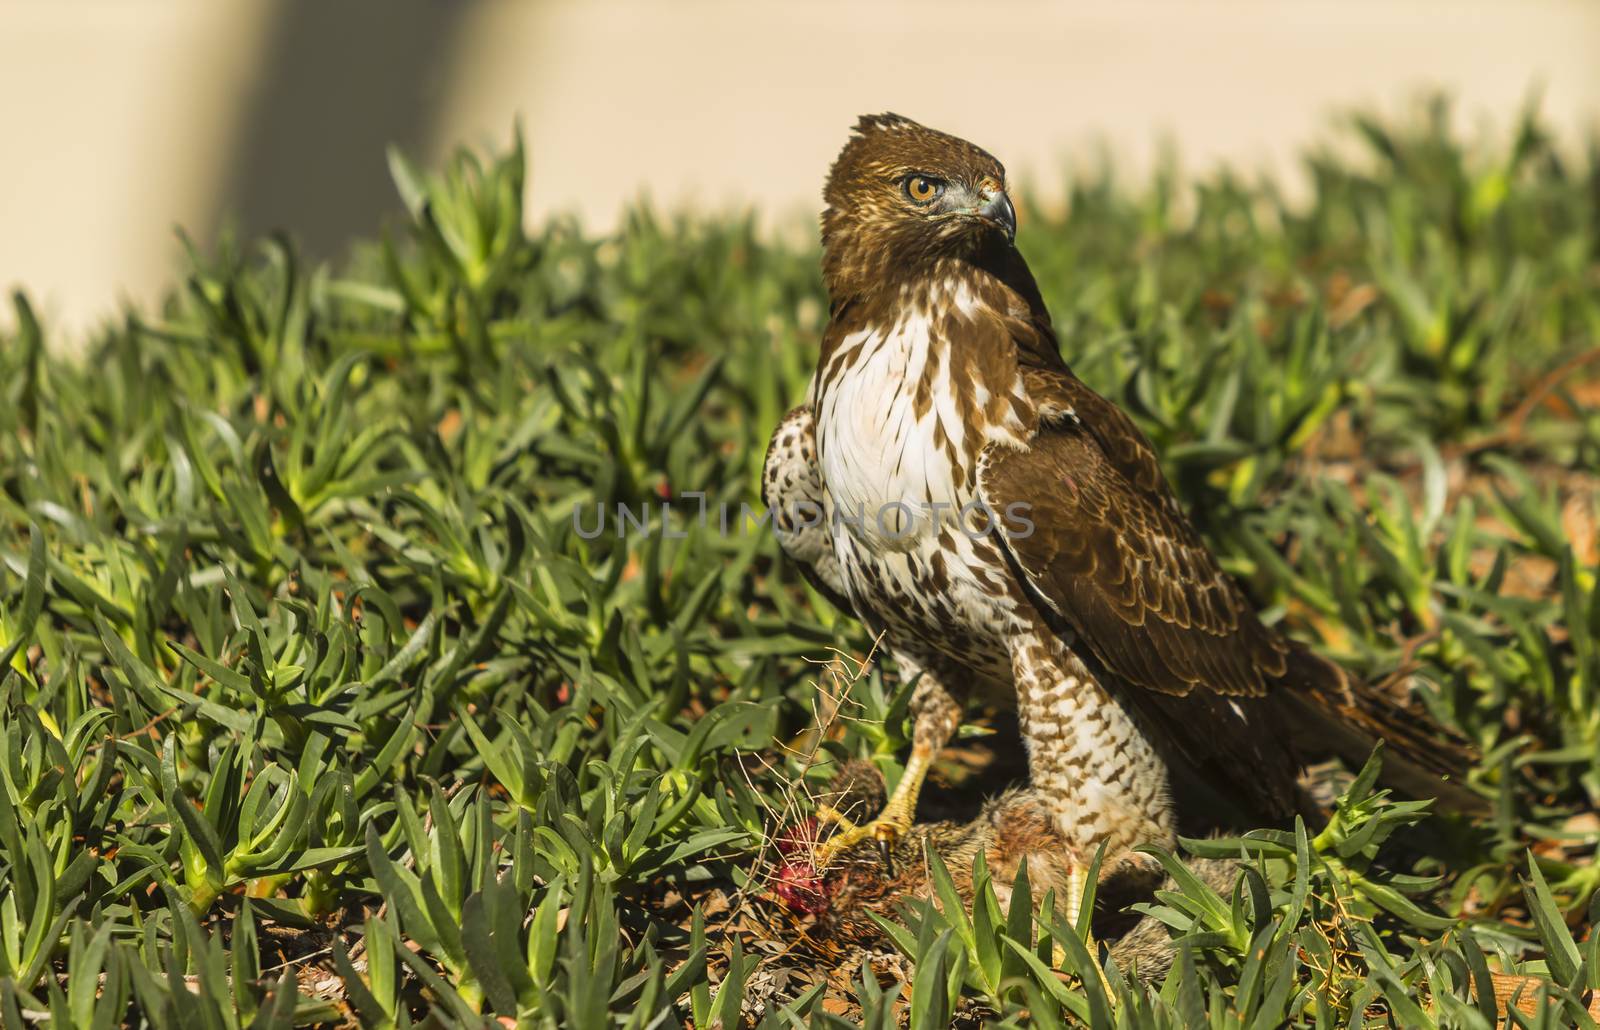 Juvenile red tailed hawk with squirrel prey on ground